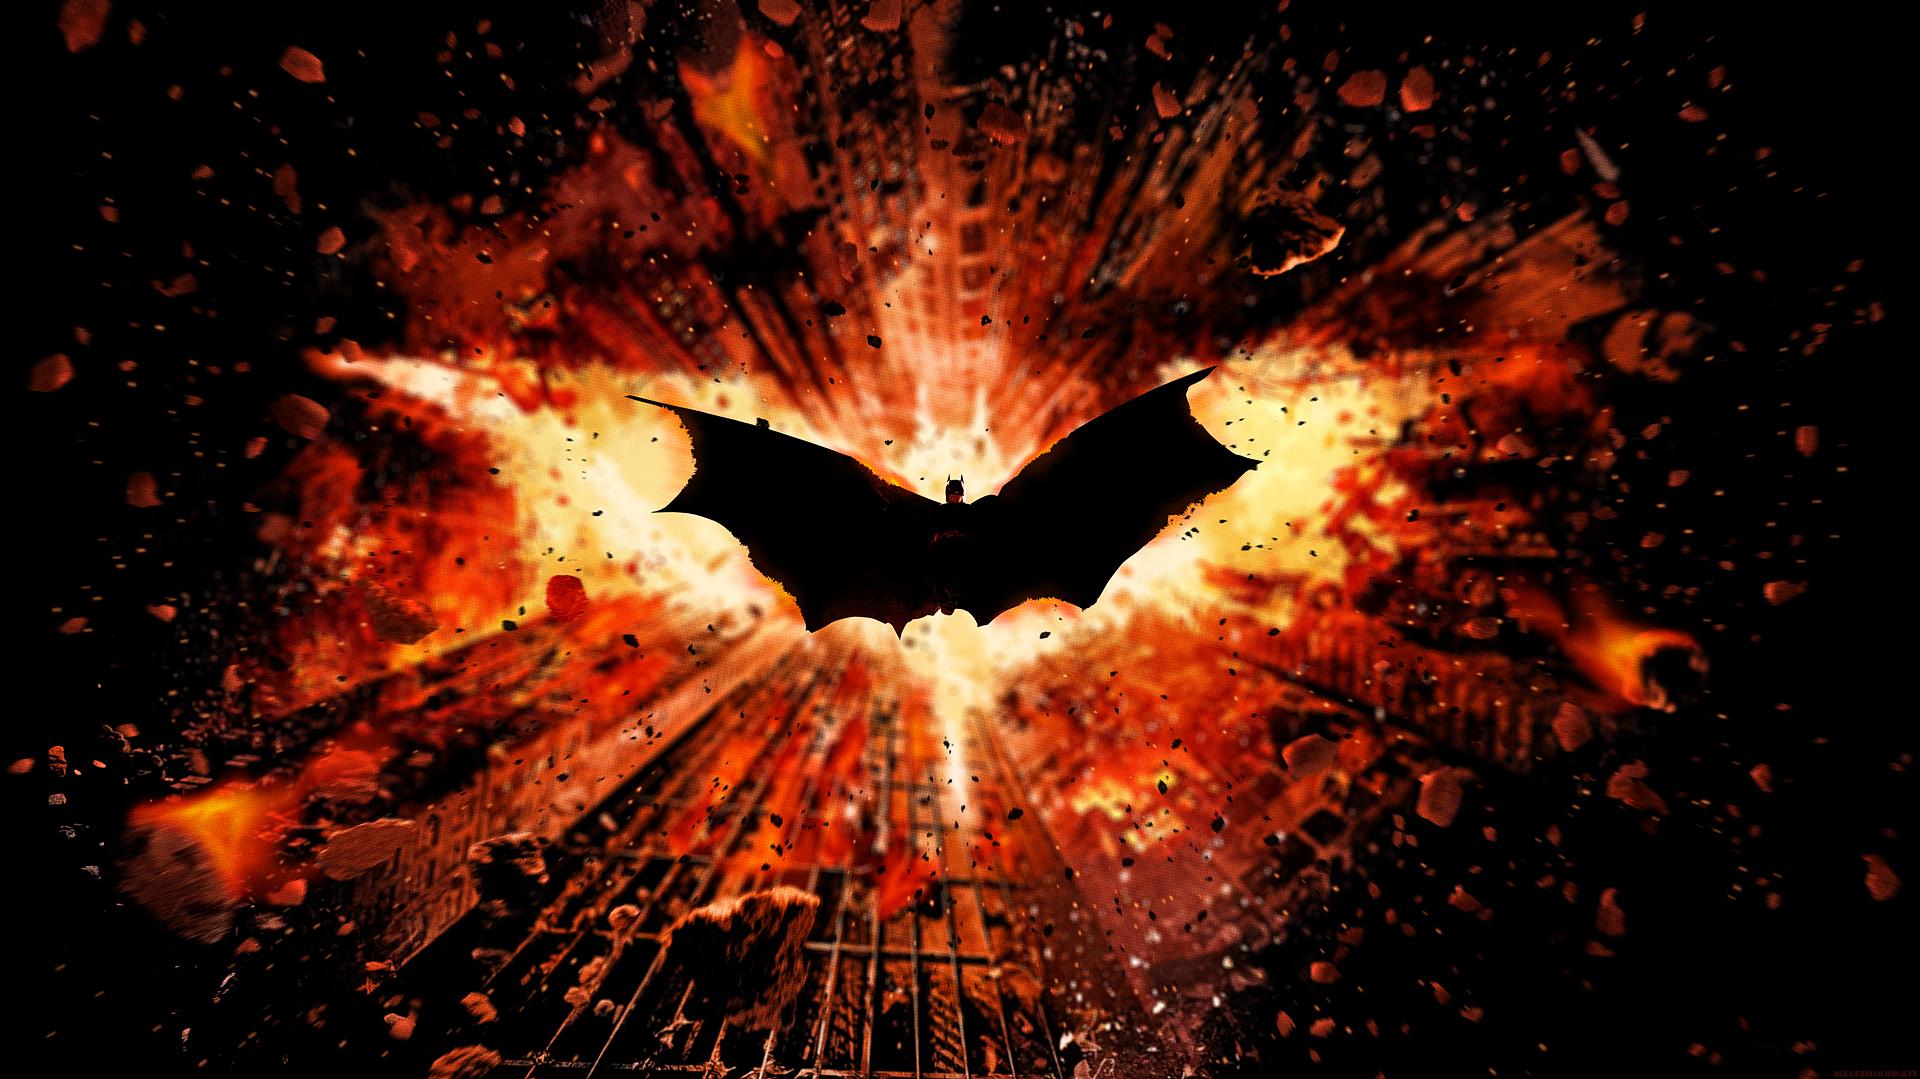 The Dark Knight Rises Wallpaper Set Awesome